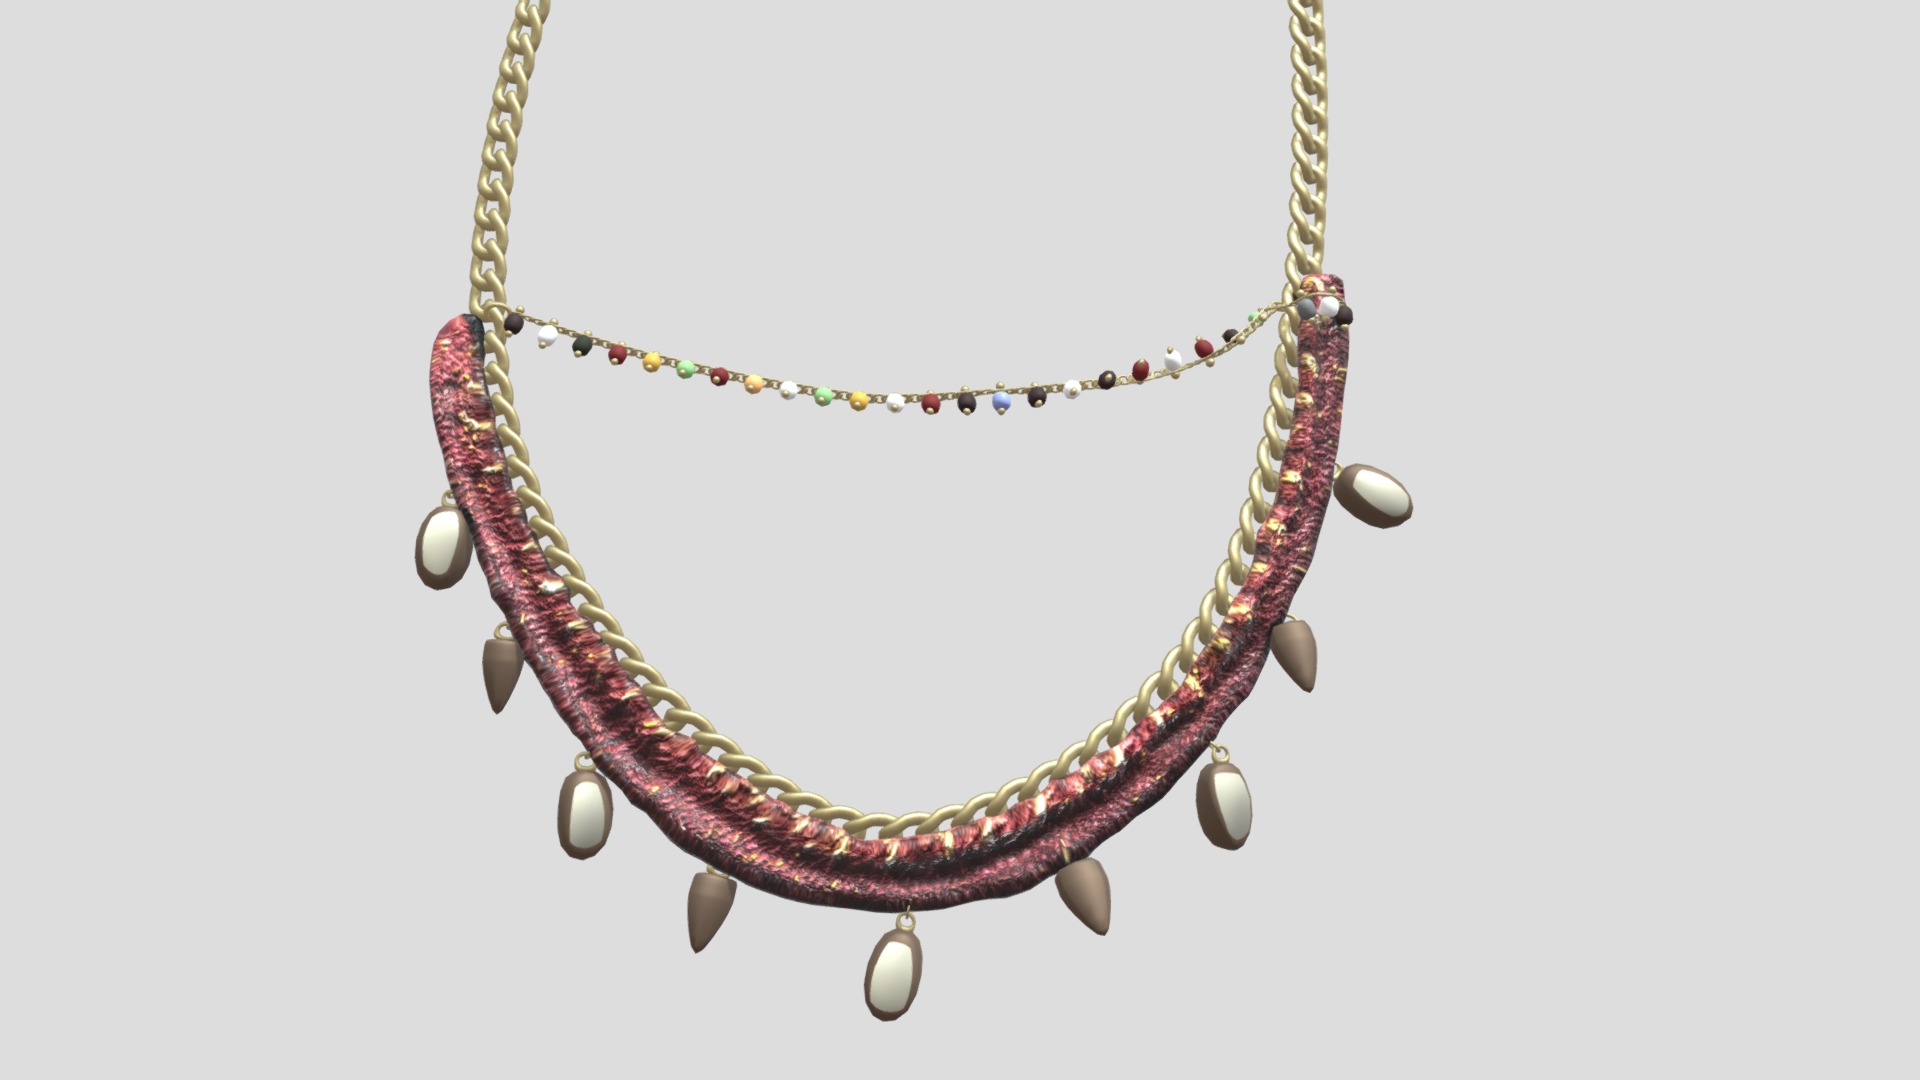 3D model Necklace - This is a 3D model of the Necklace. The 3D model is about a necklace with a red and gold pendant.